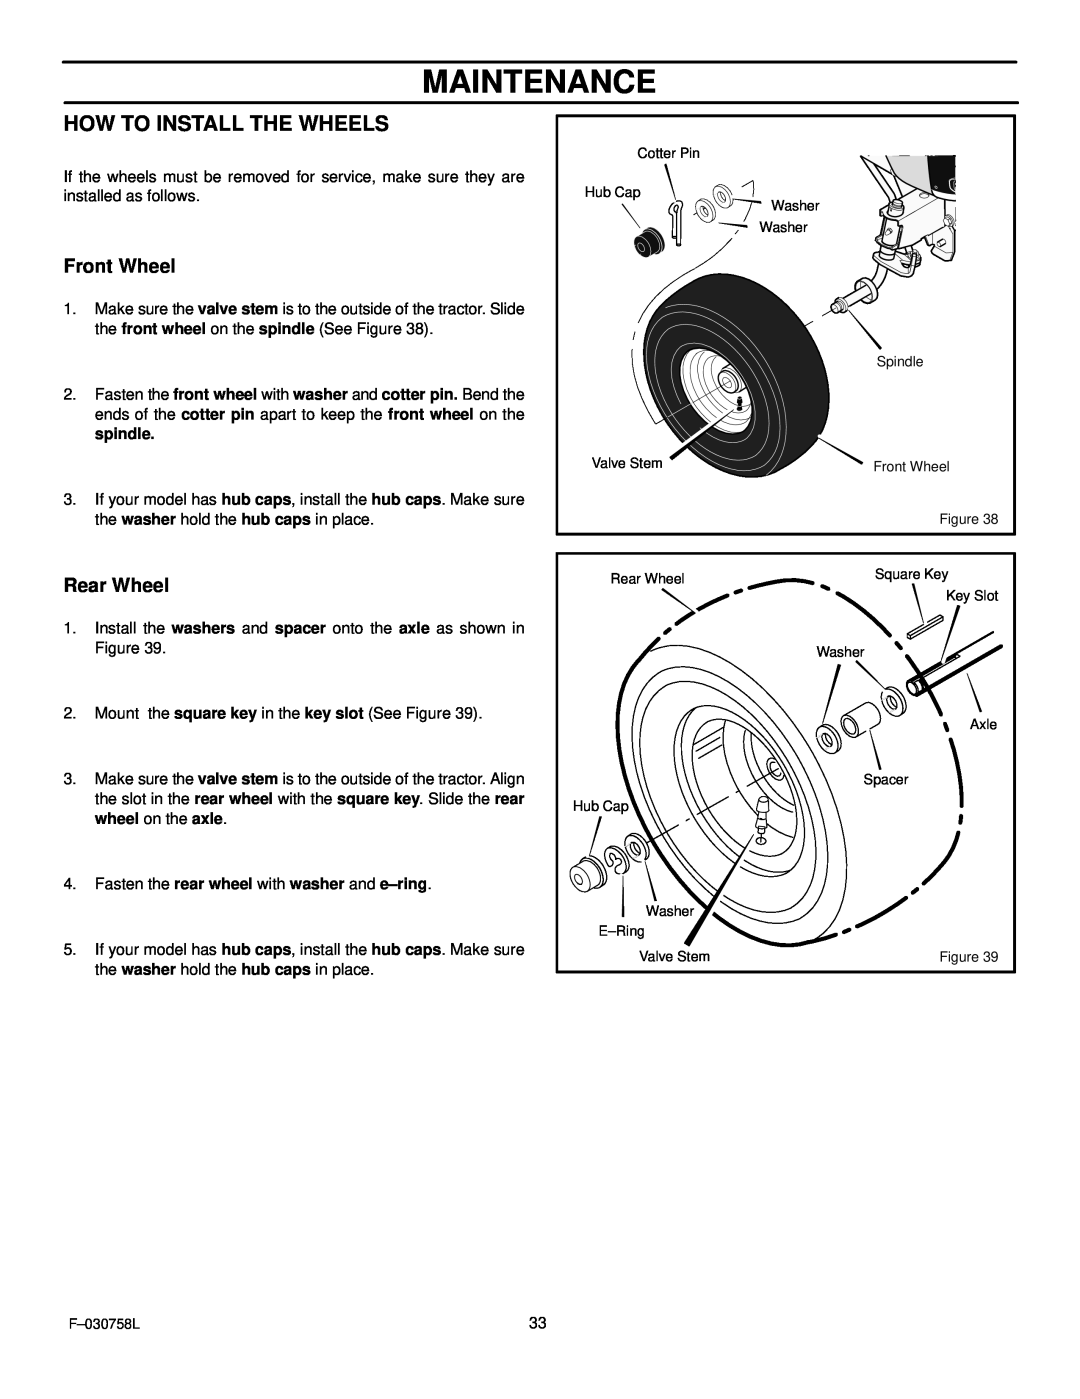 Murray 465609x24A manual Maintenance, How To Install The Wheels, Front Wheel, Rear Wheel 